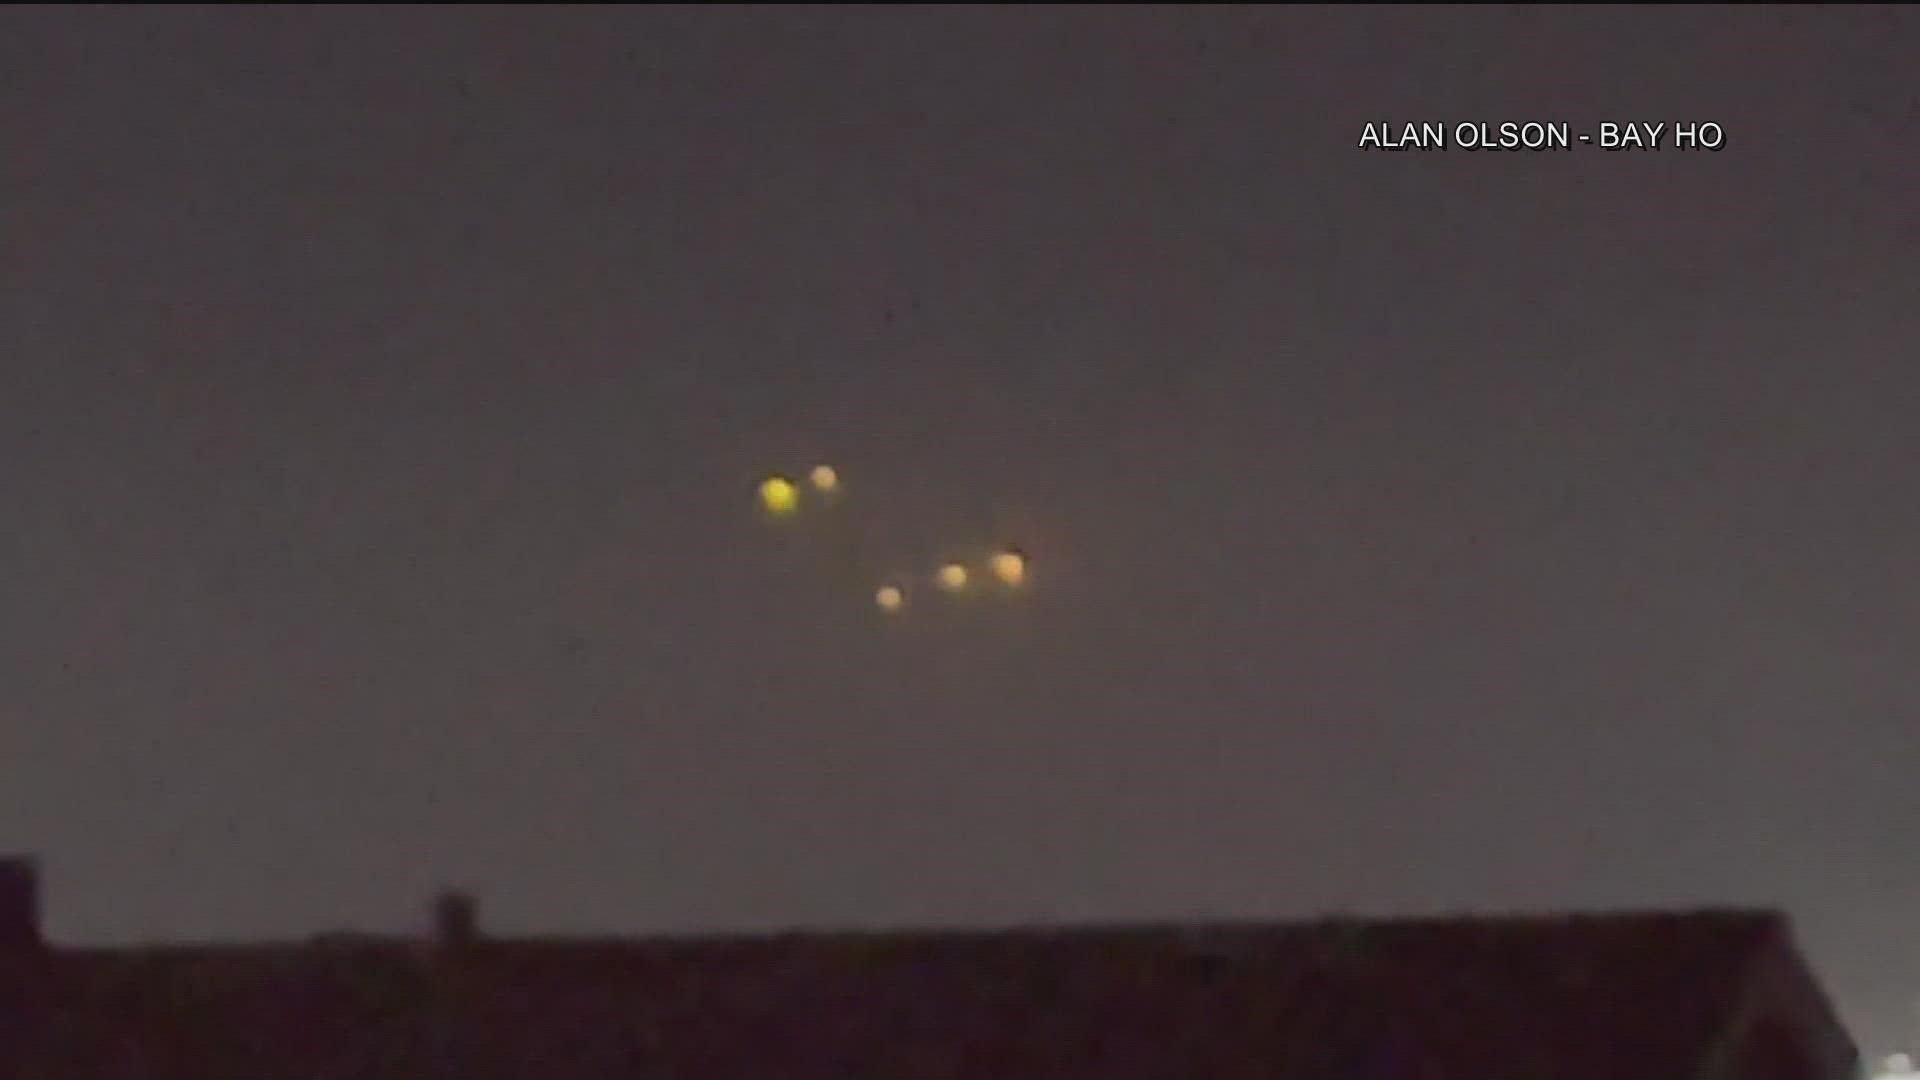 Many CBS 8 viewers saw the floating lights off the San Diego coast around 10 p.m. on Monday and wondered what they were.